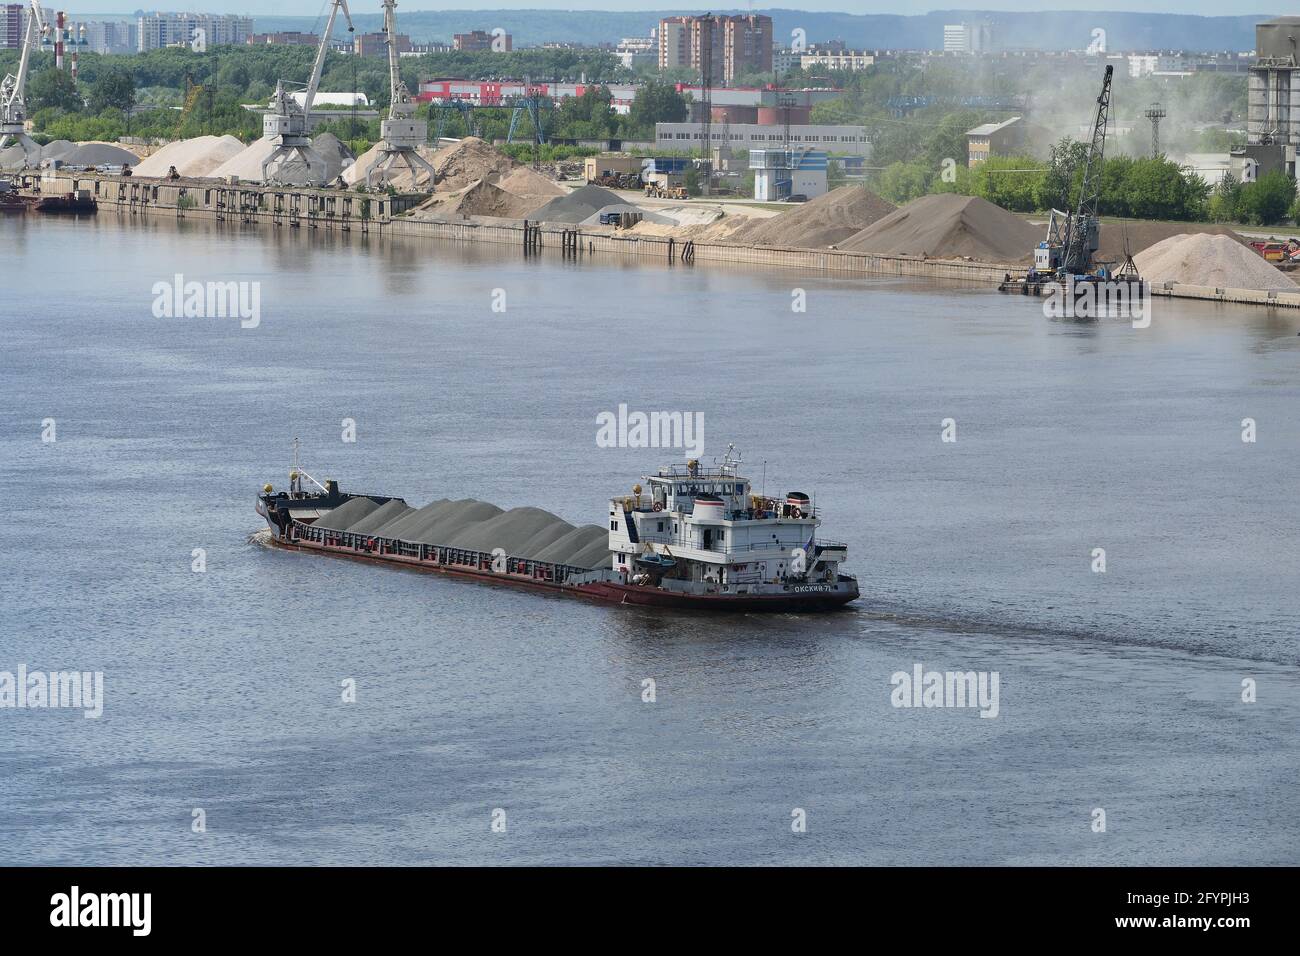 The tug transports a barge loaded with sand along the river. Stock Photo